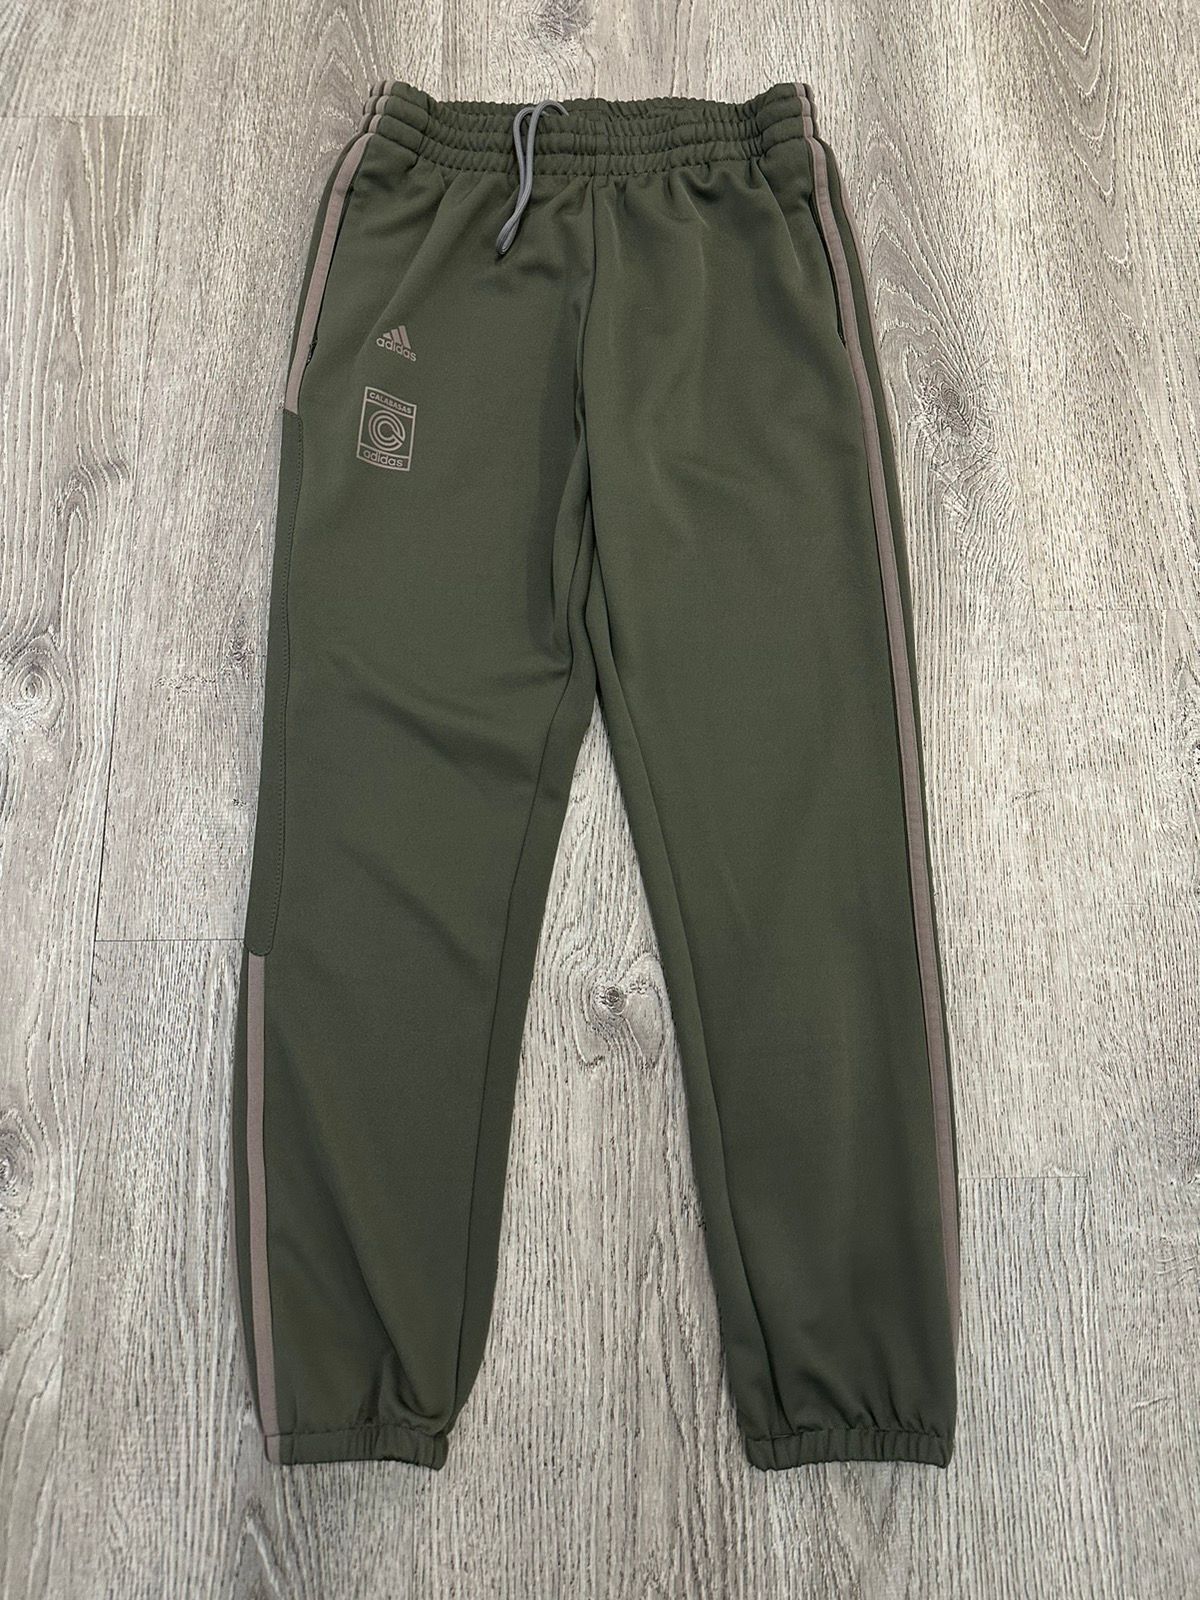 Pre-owned Adidas X Kanye West Adidas Calabasas Track Pants In Green